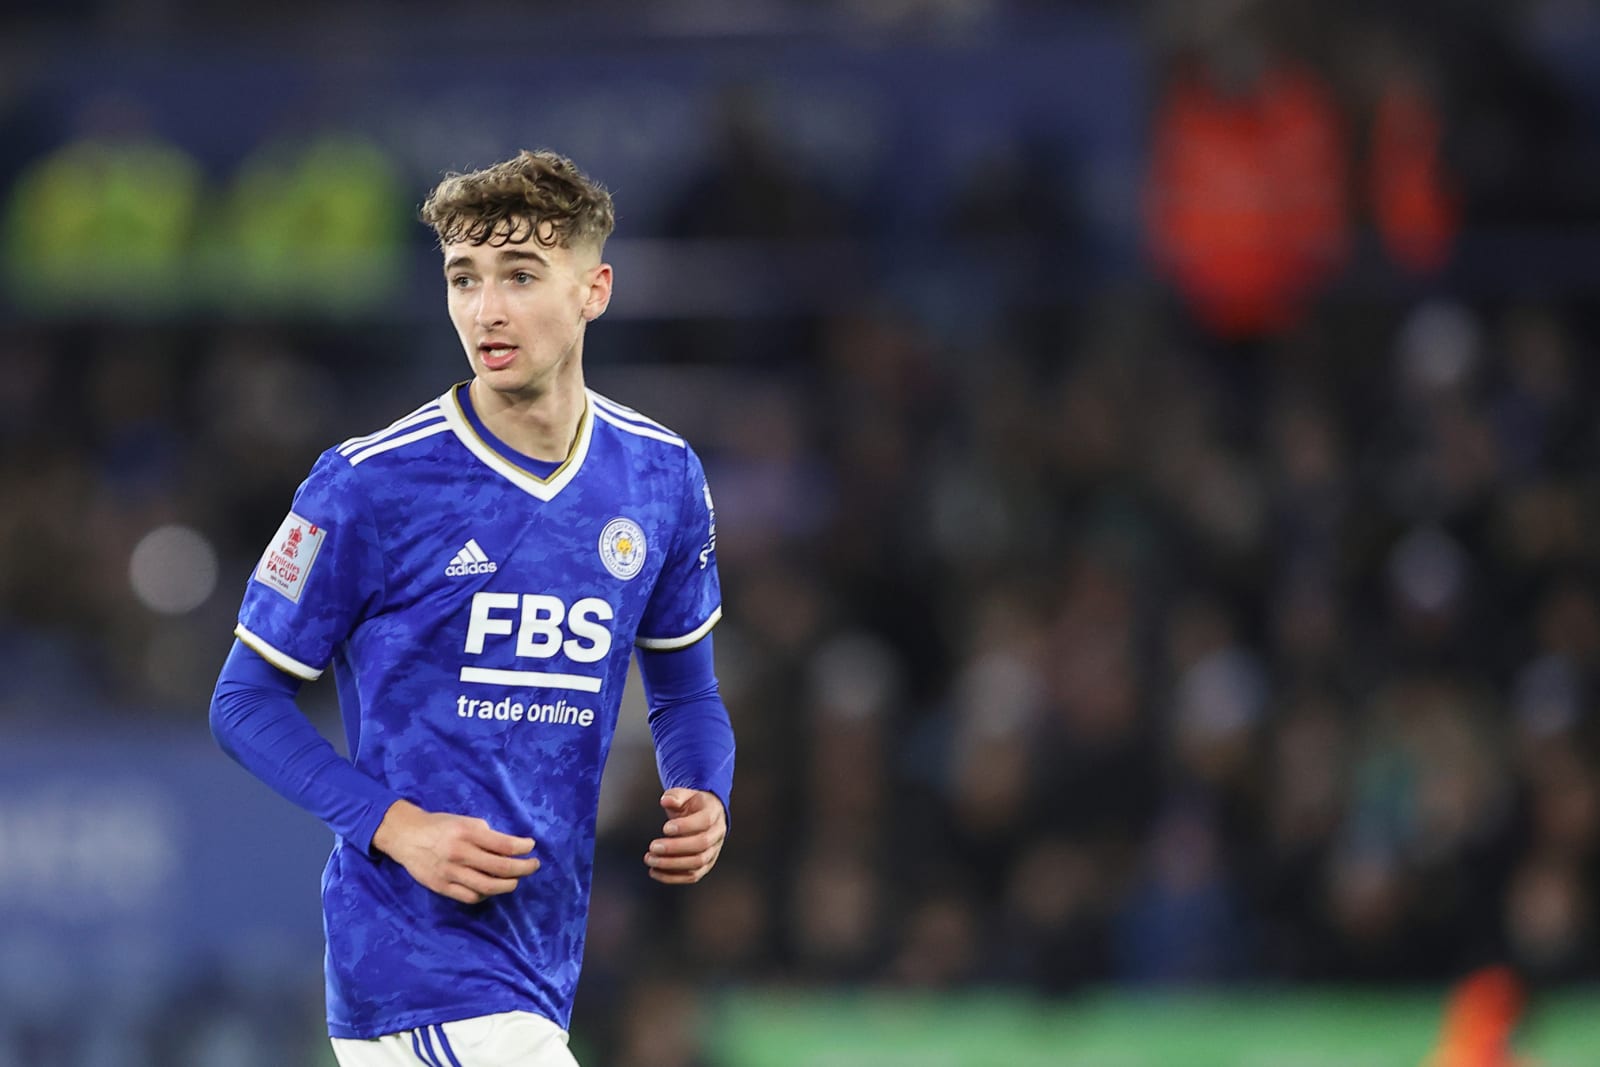 The latest Leicester City starlet to make the jump to first team action